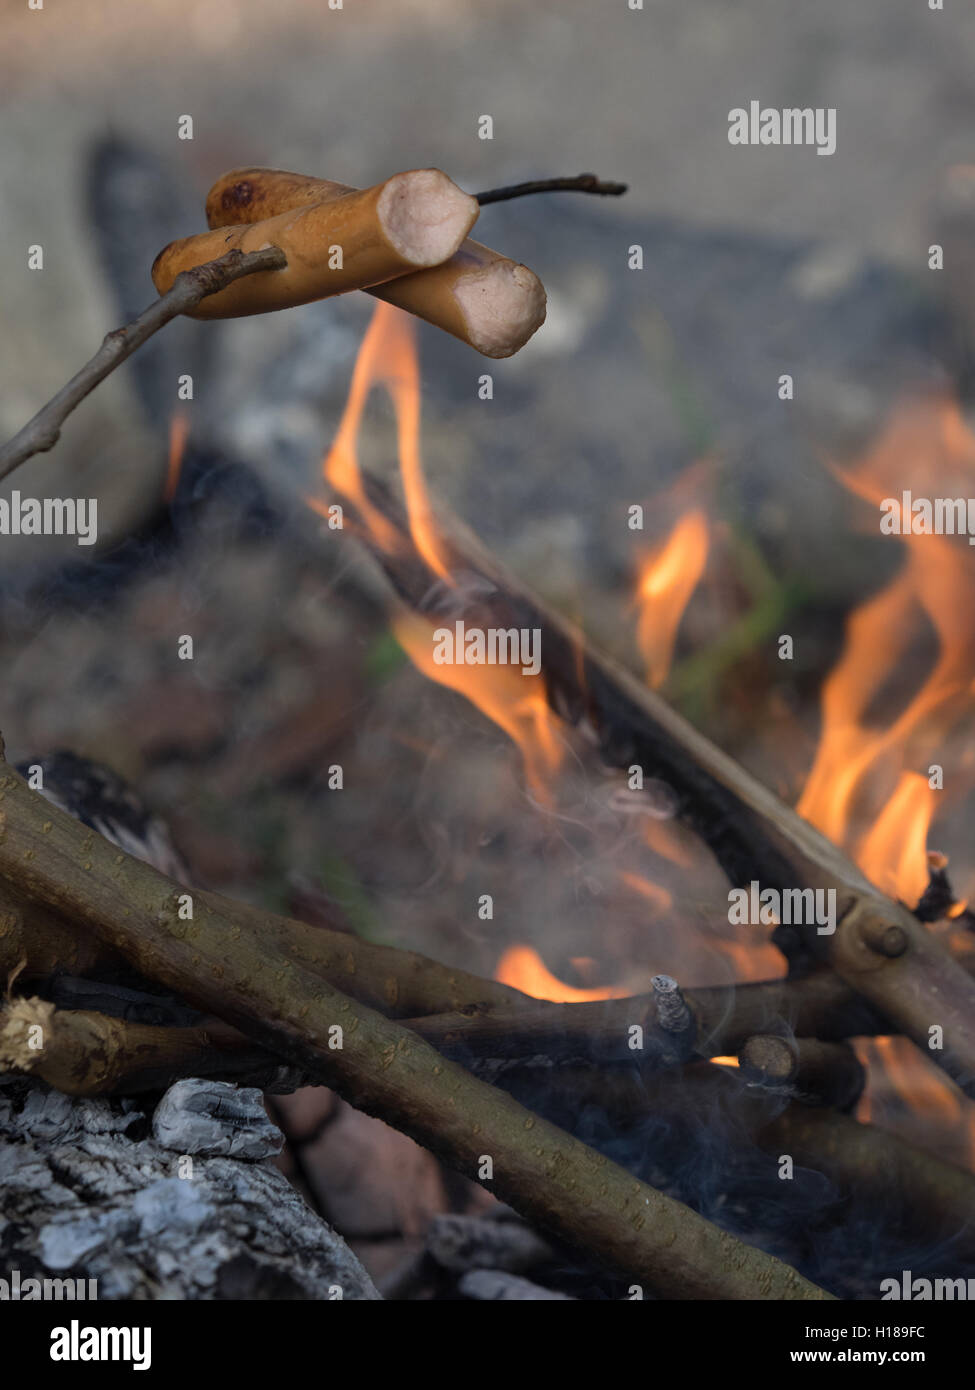 Frankfurters fried over open fire at a camping site in a wild Stock Photo